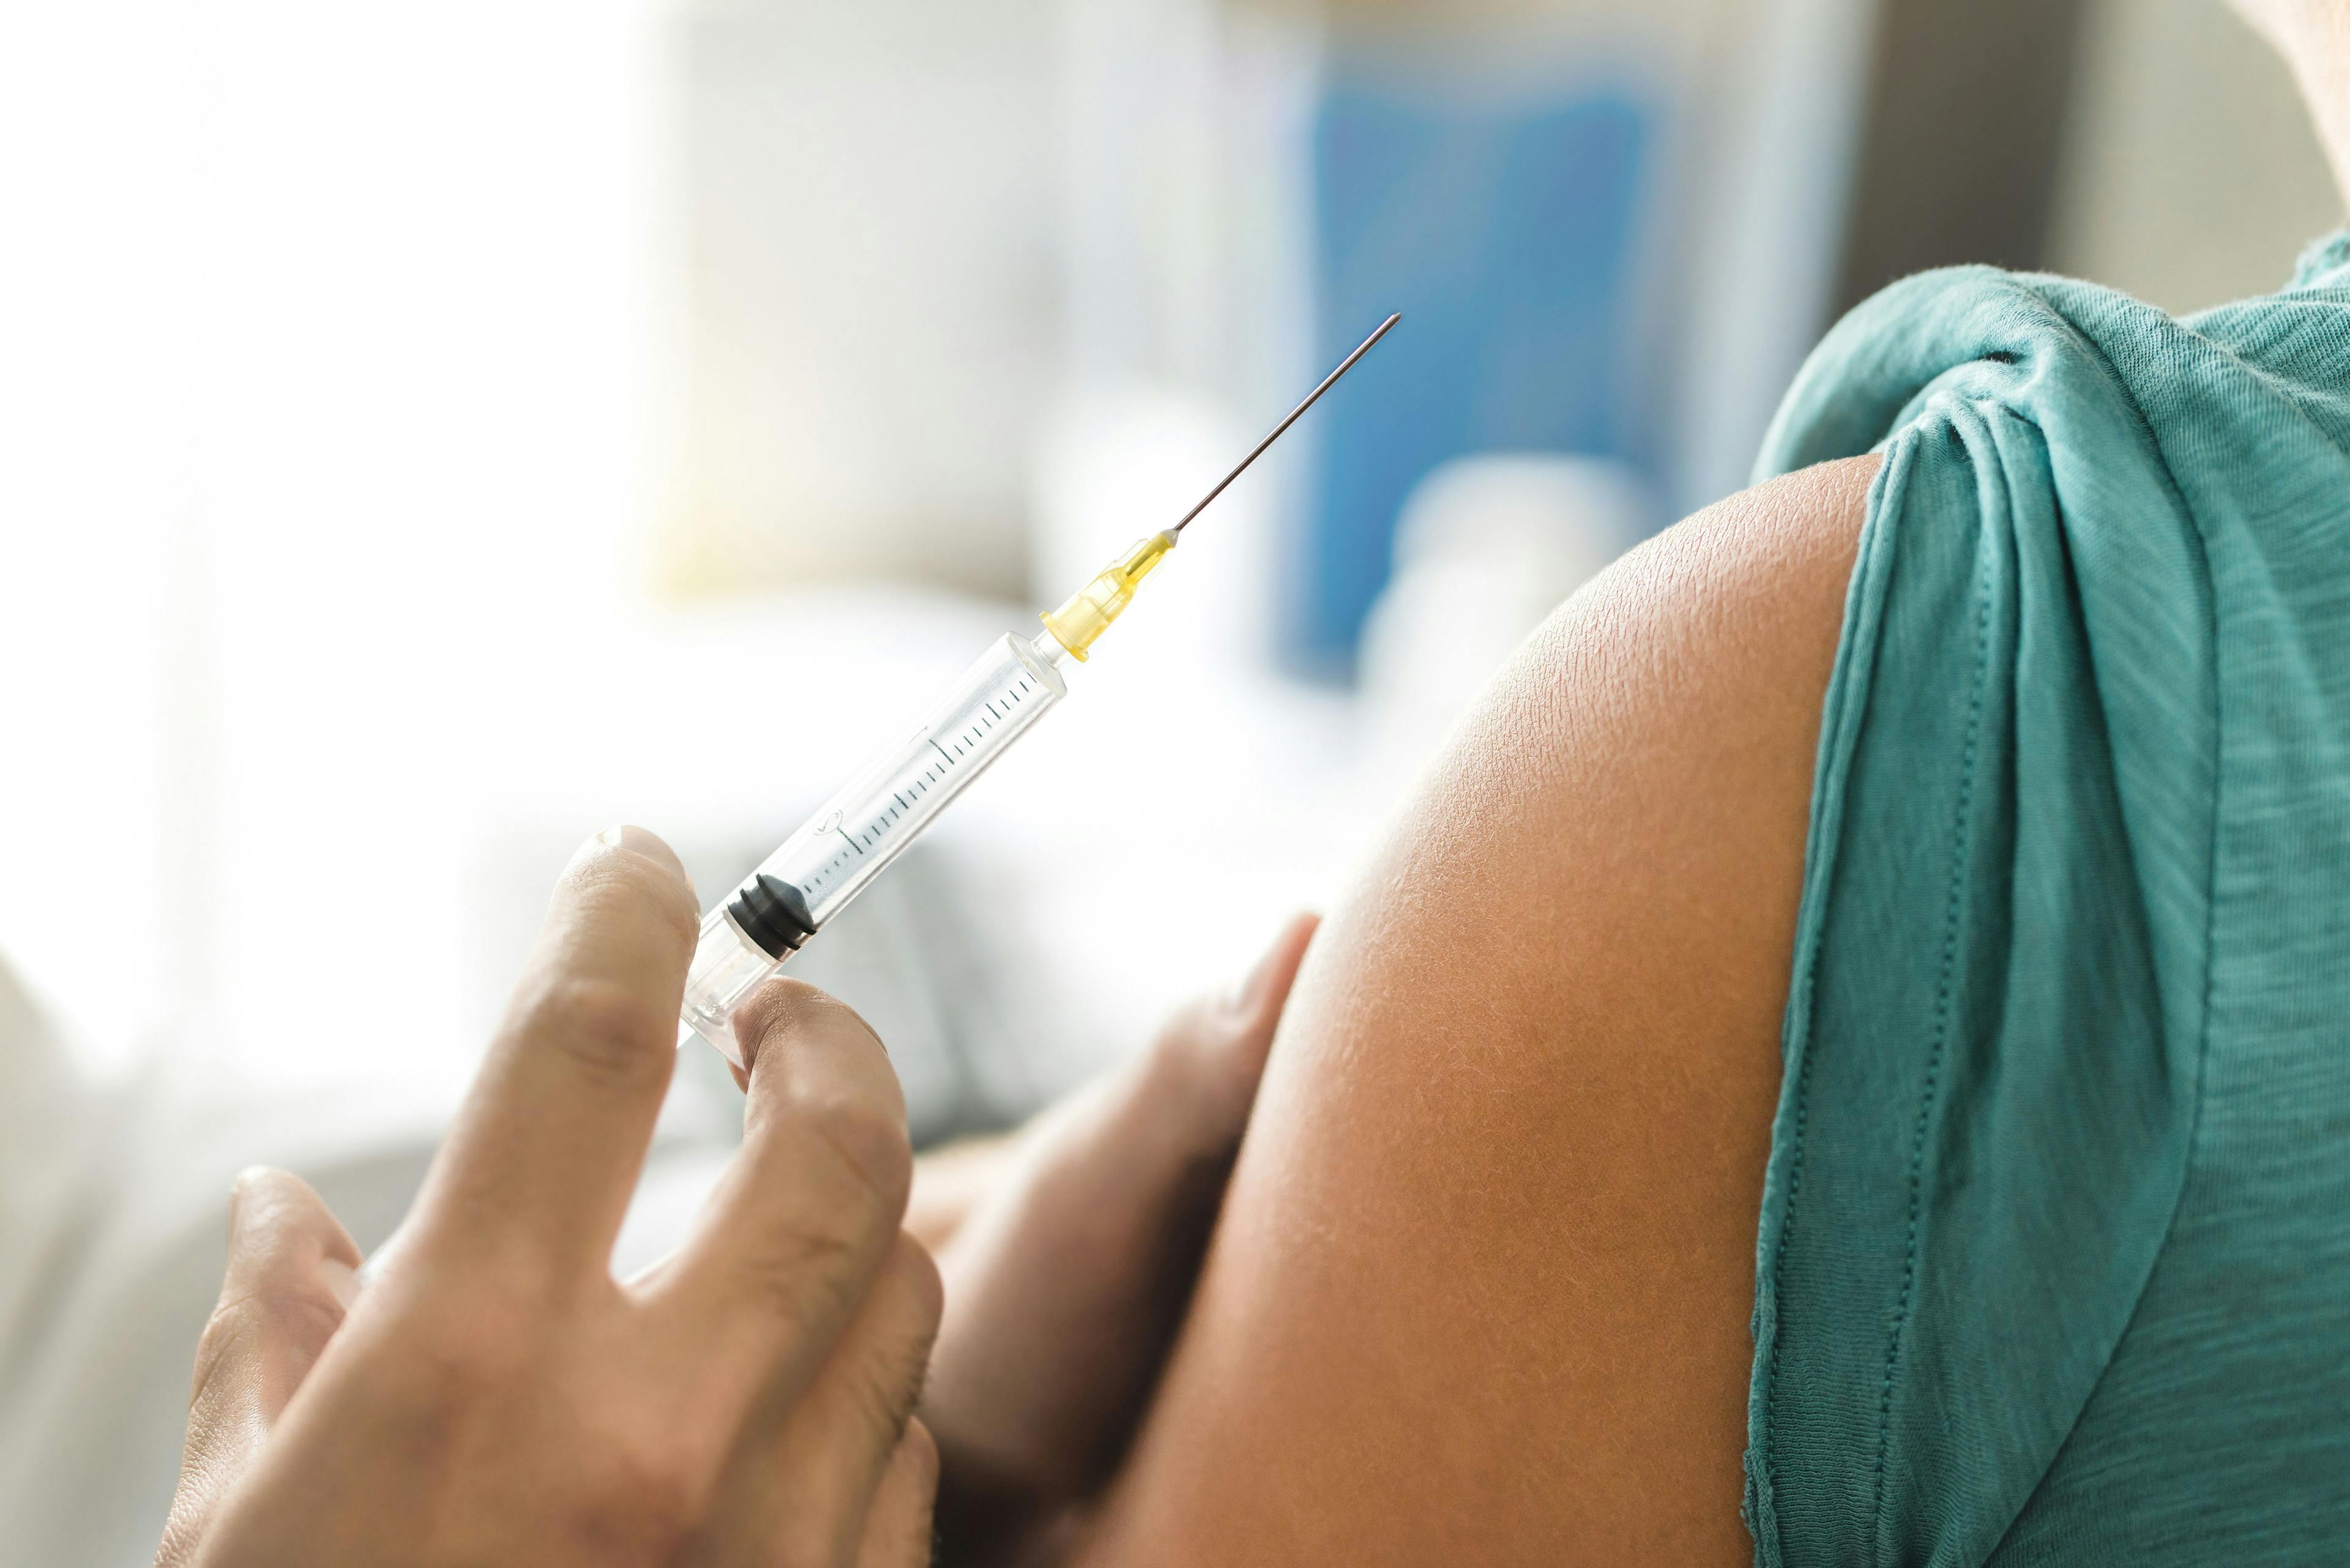 Vaccine or flu shot in injection needle. Doctor working with patient's arm. Physician or nurse giving vaccination and immunity to virus, influenza or HPV with syringe. Appointment with medical expert. | Image Credit: terovesalainen - stock.adobe.com